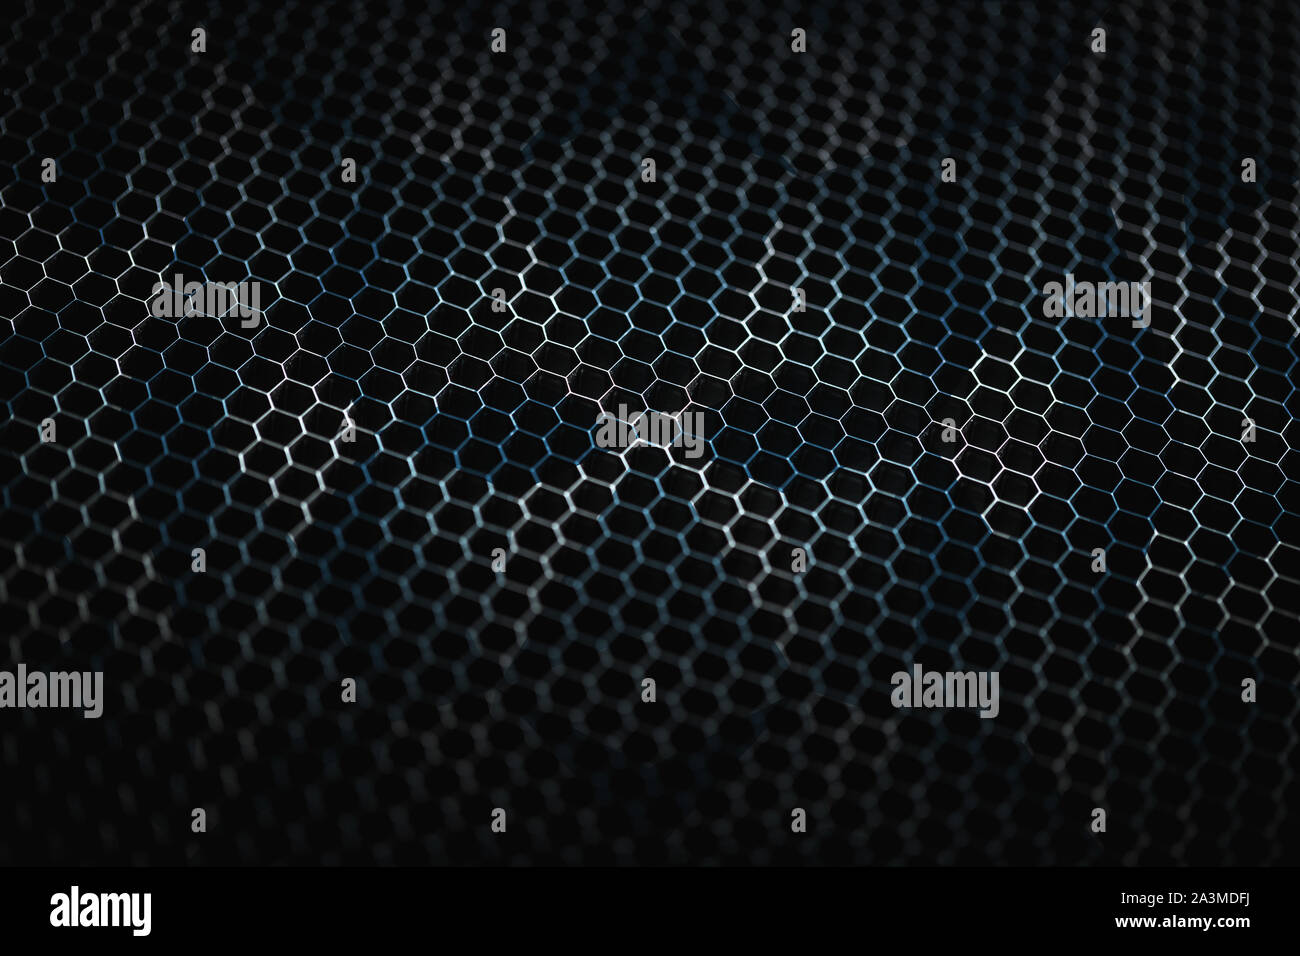 Perforated sheet metal texture with abstract blue geometric background. Stock Photo